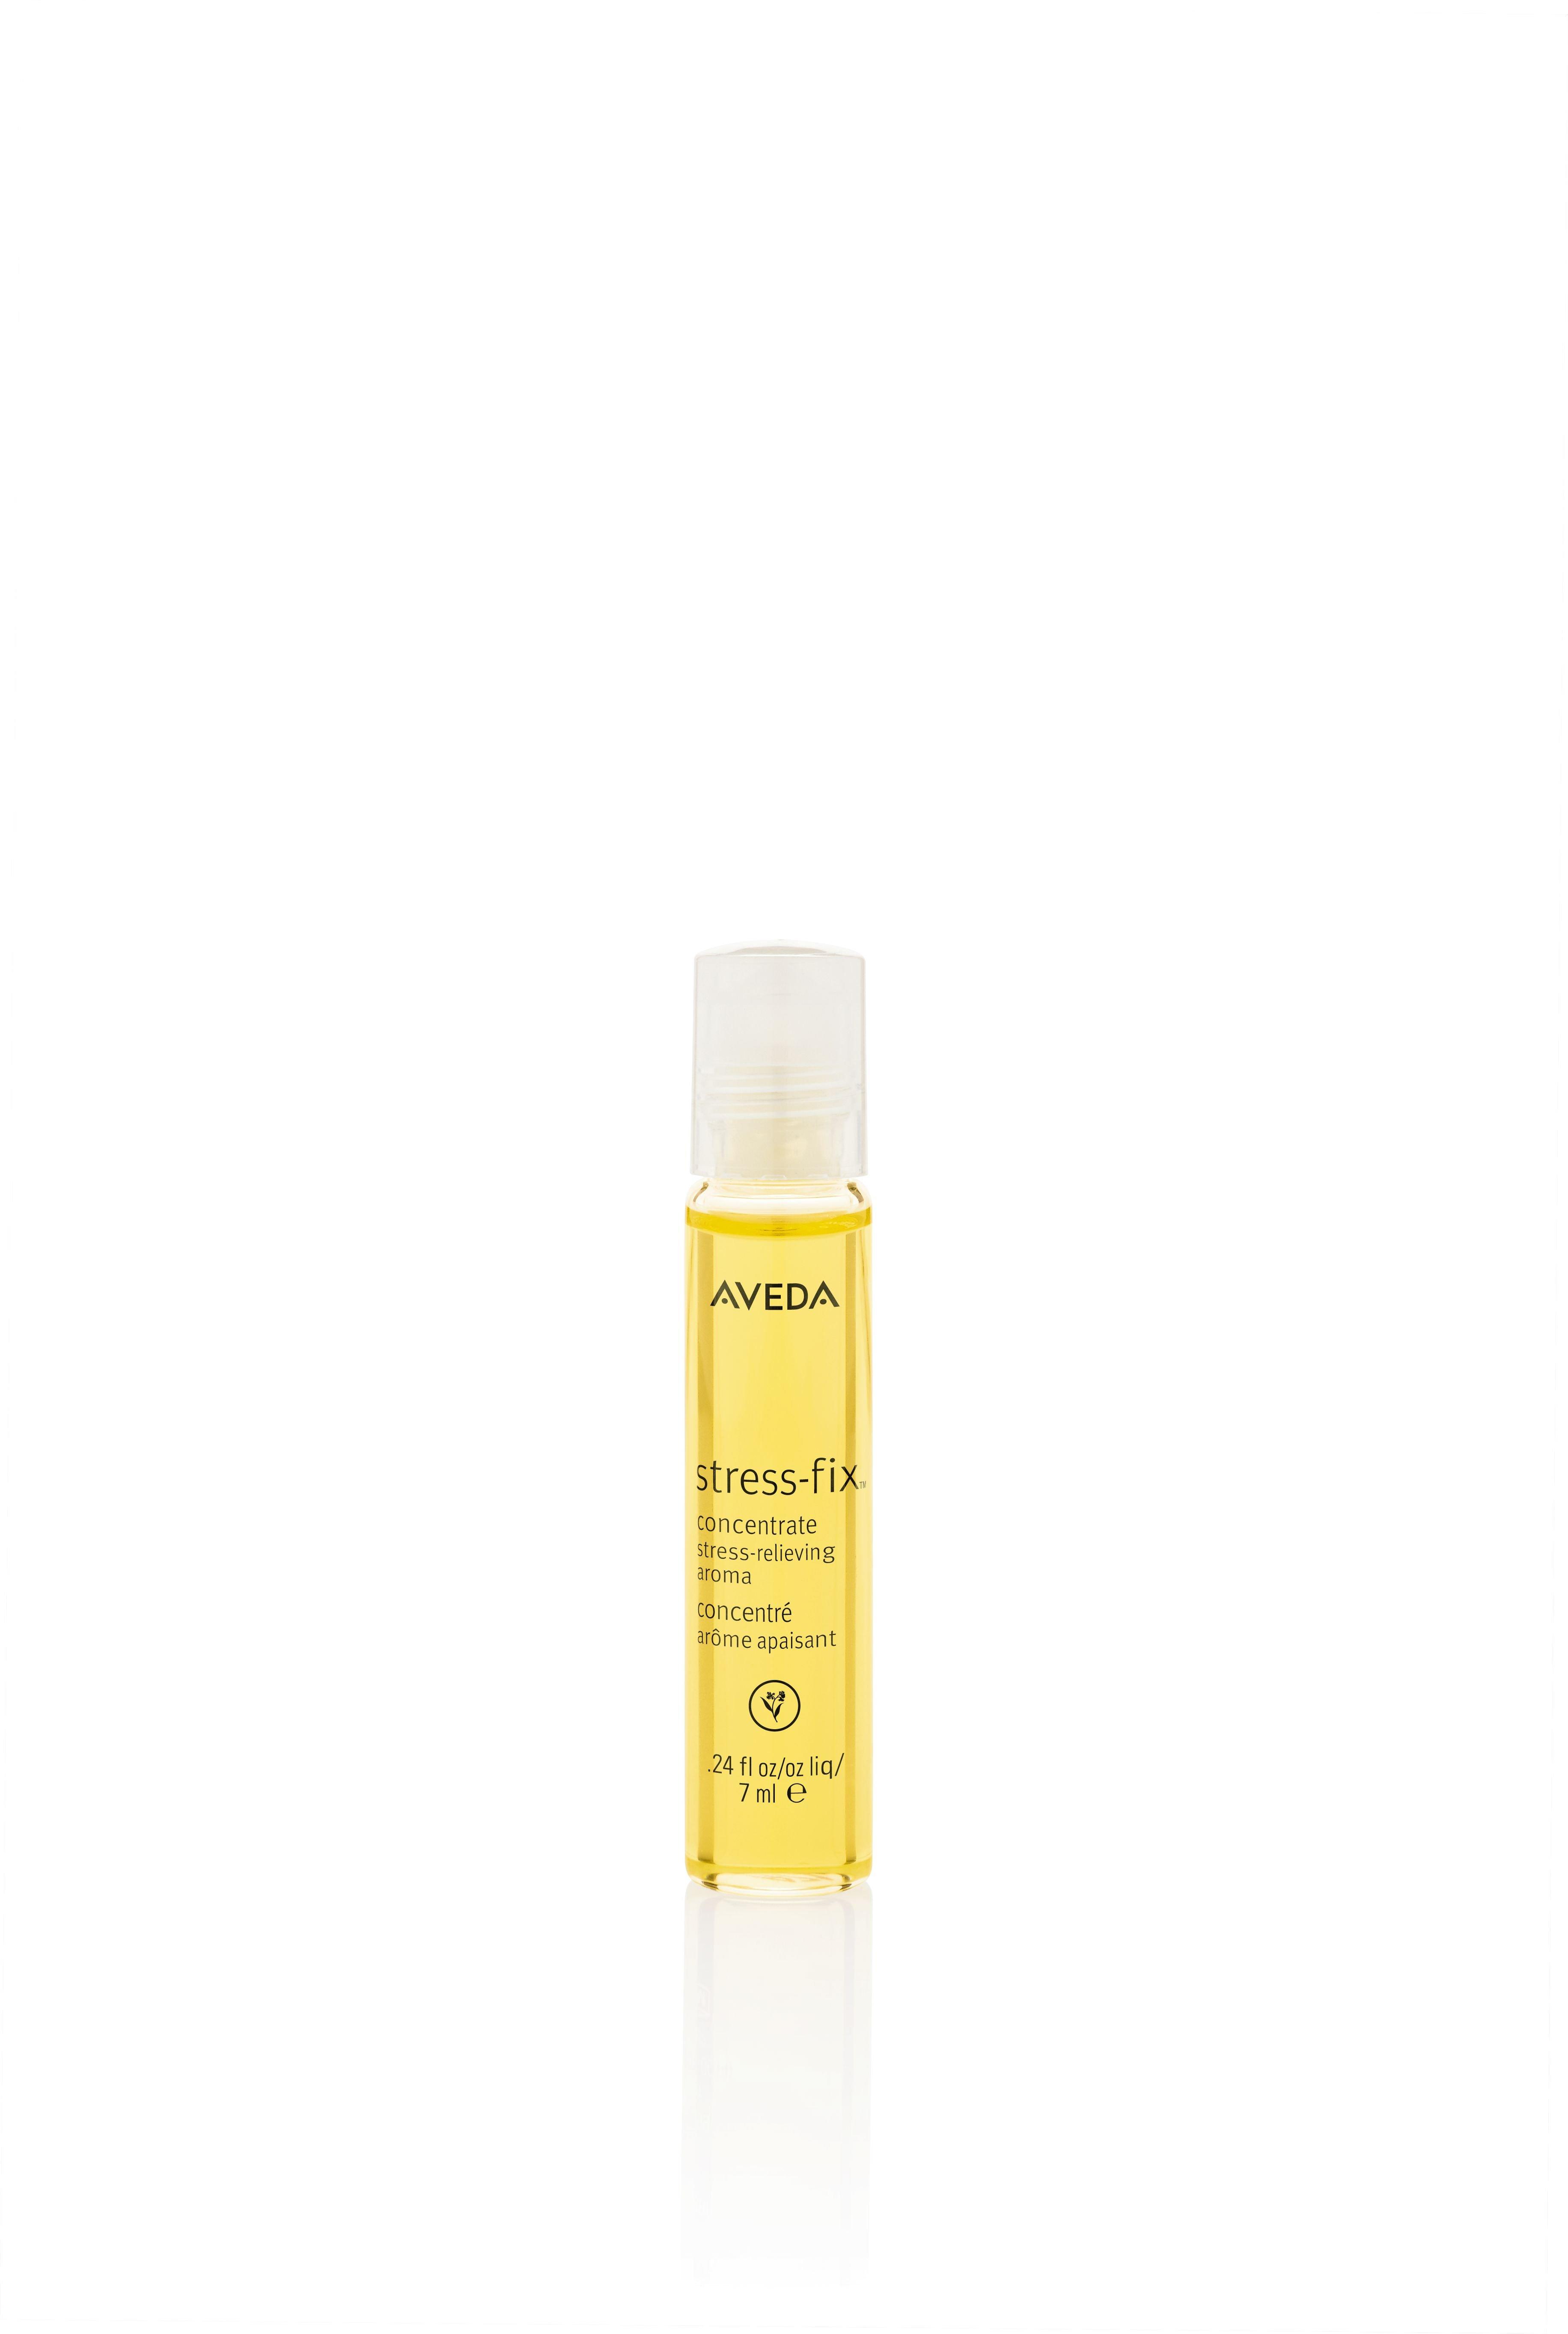 Image of AVEDA Stress-Fix? Concentrate - 7ml